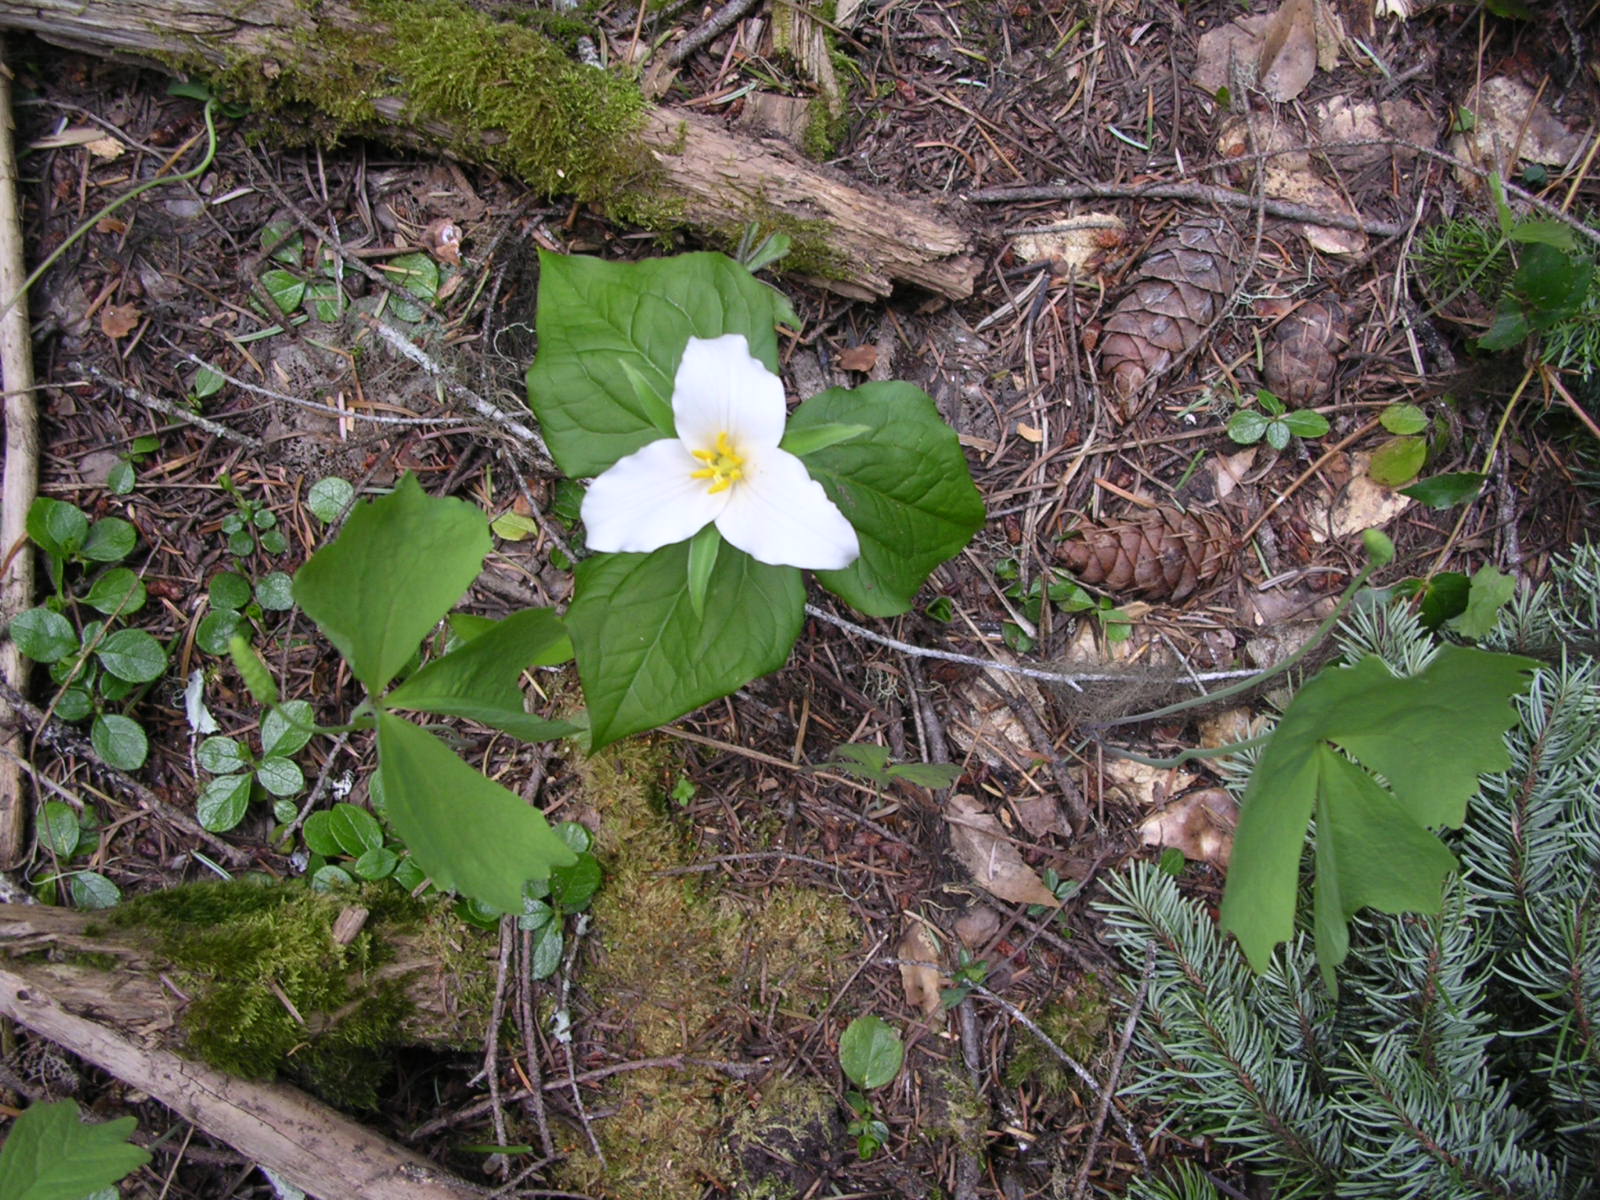 A Trillium flower offcenter in the photo growing off a moist forest floor. There are other leaves, mosses and twigs in the picture. This picture was taken within the Juncrock Timber Sale.